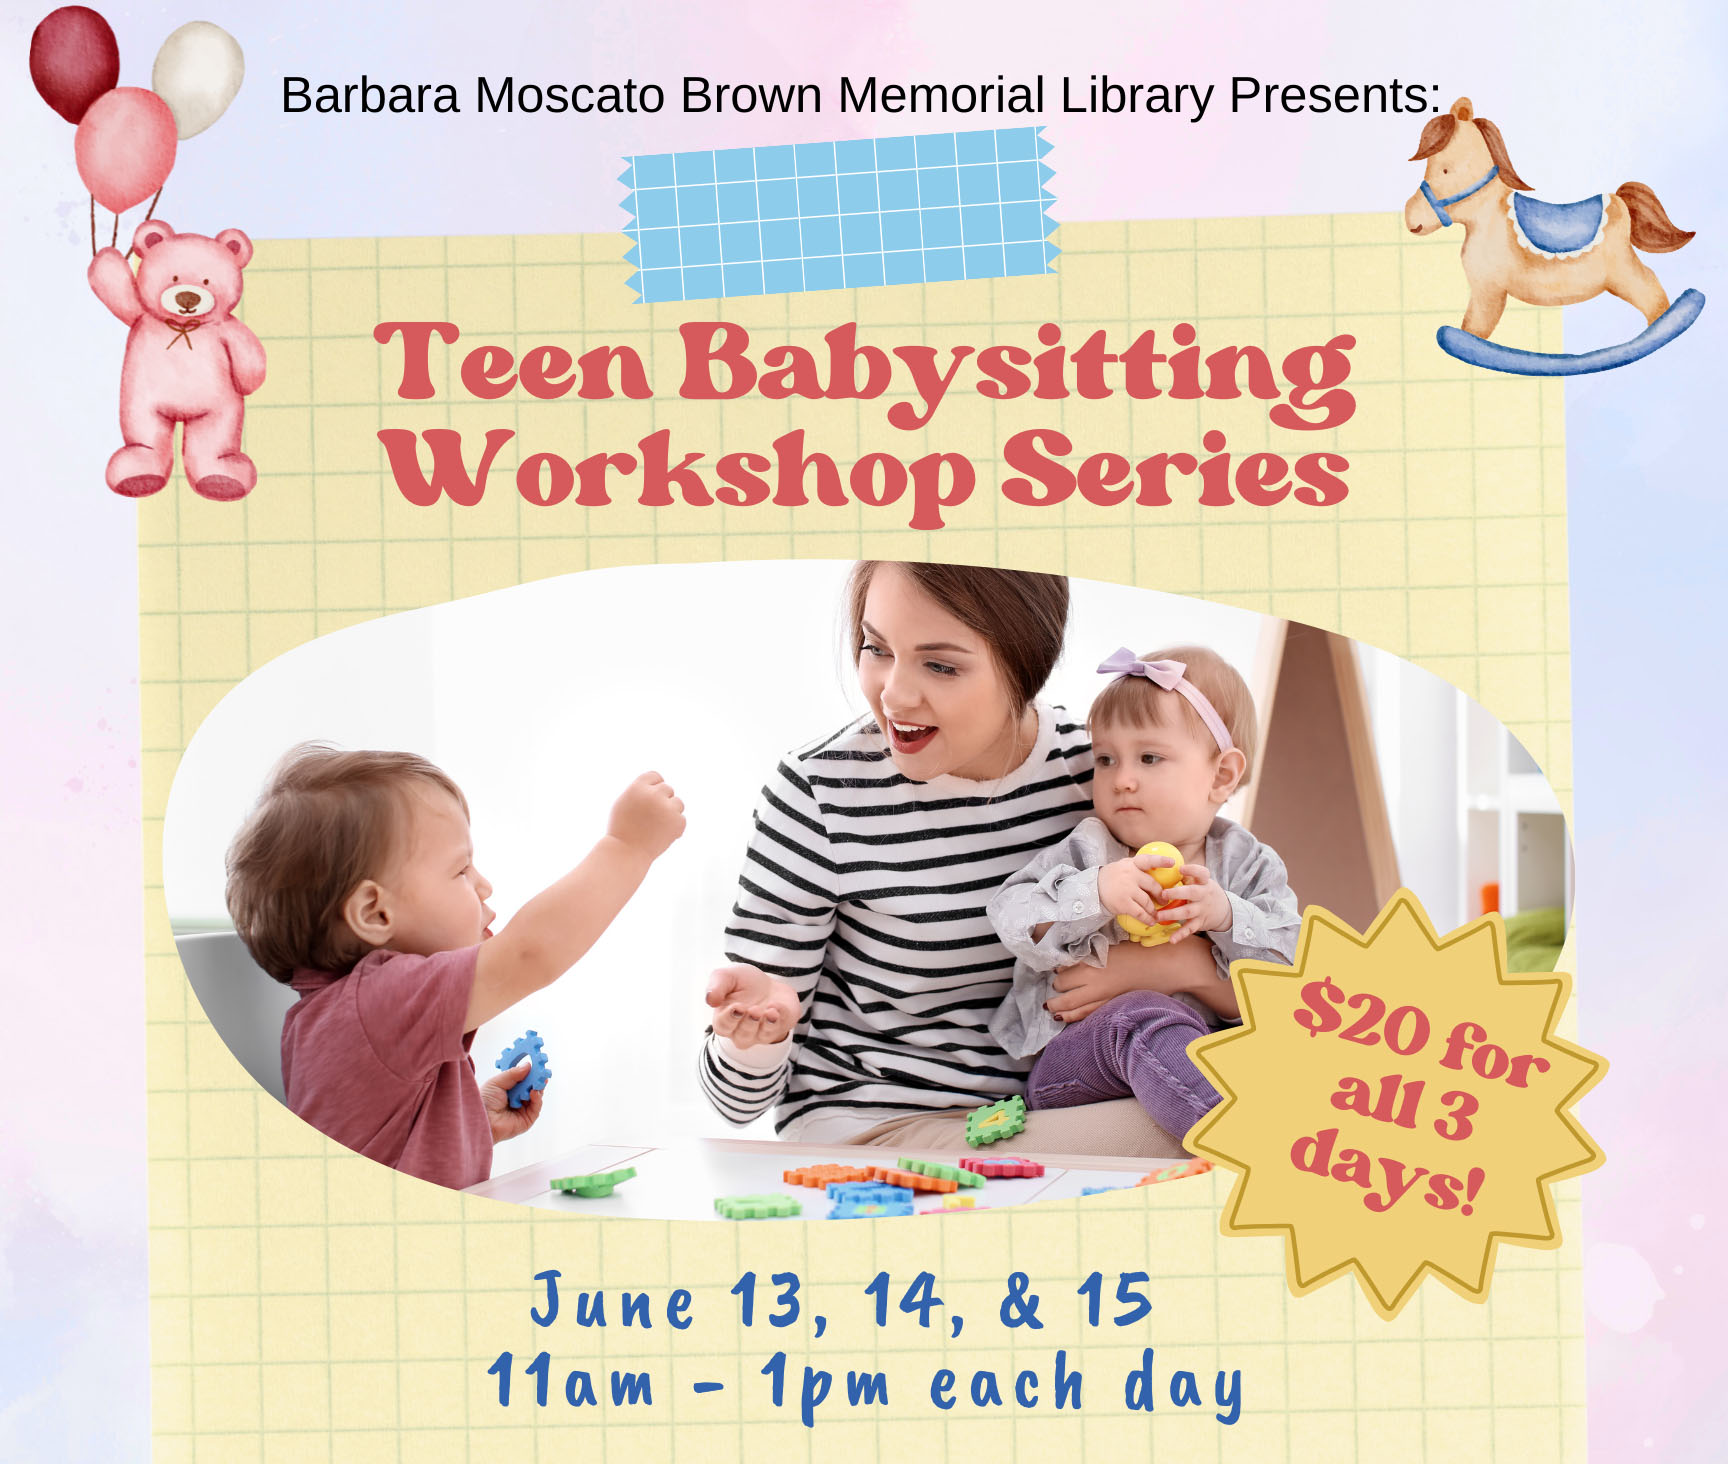 Image is teen girl playing with two babies. Text reads Barbara Moscato Brown Memorial Library presents: Twwn Babysitting Workshop Series.  for all 3 days. June 13, 14, and 15